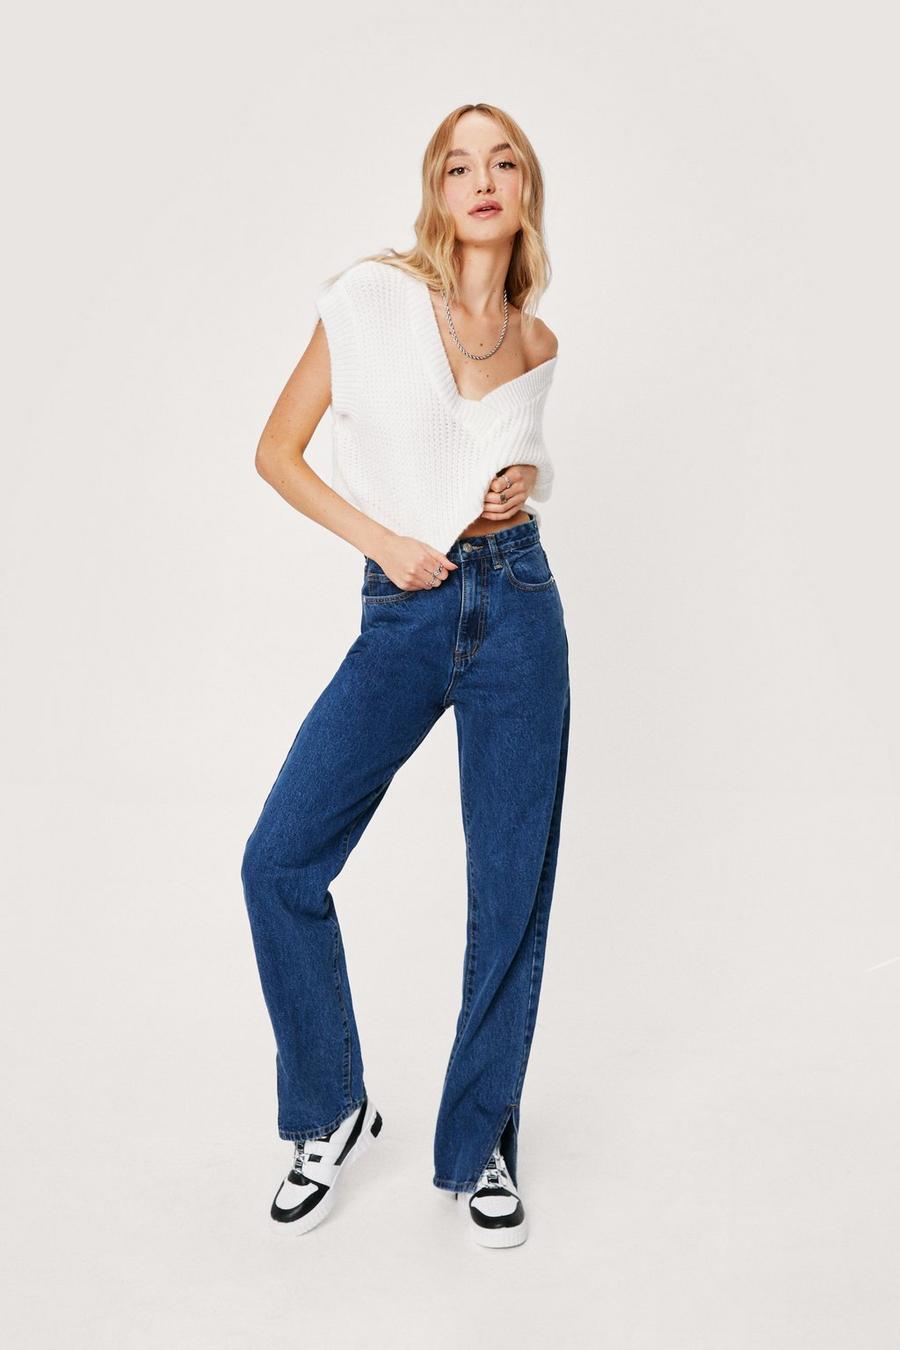 Slit's Now or Never High-Waisted Jeans